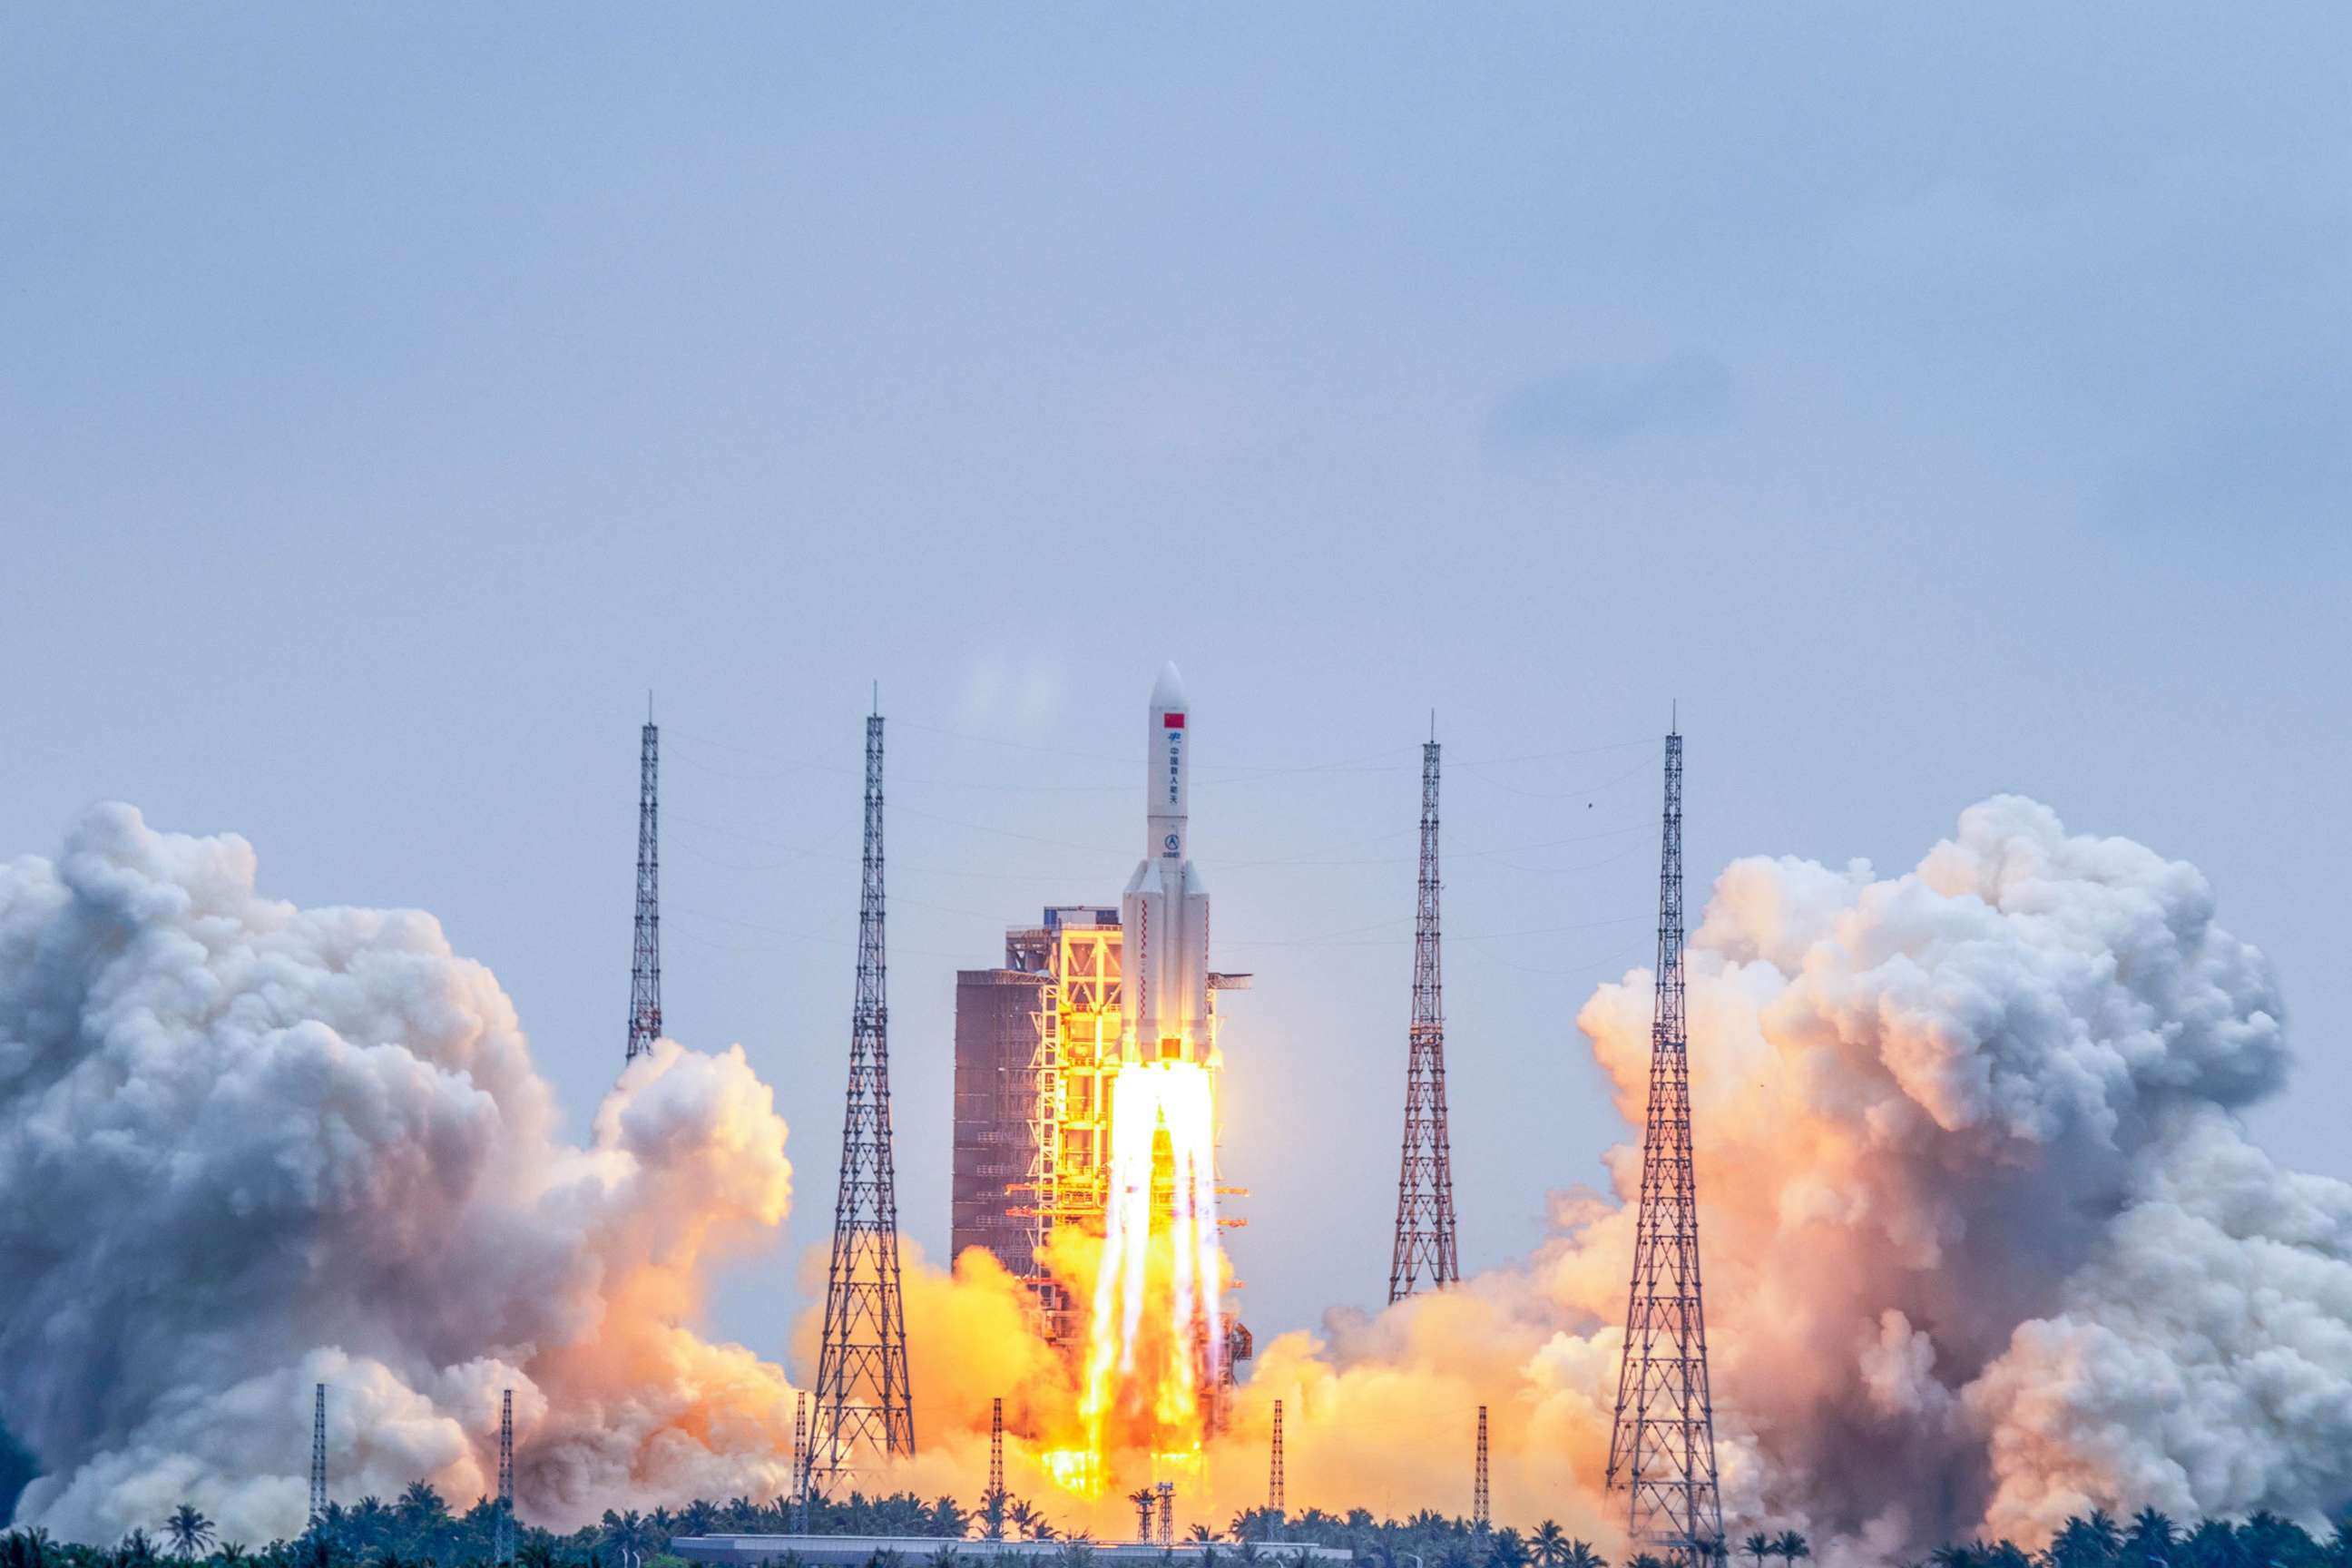 PHOTO: The Long March-5B Y2 rocket carrying the core module of China's space station, Tianhe, blasts off from the Wenchang Spacecraft Launch Site in Wenchang, Hainan Province of China, April 29, 2021. 